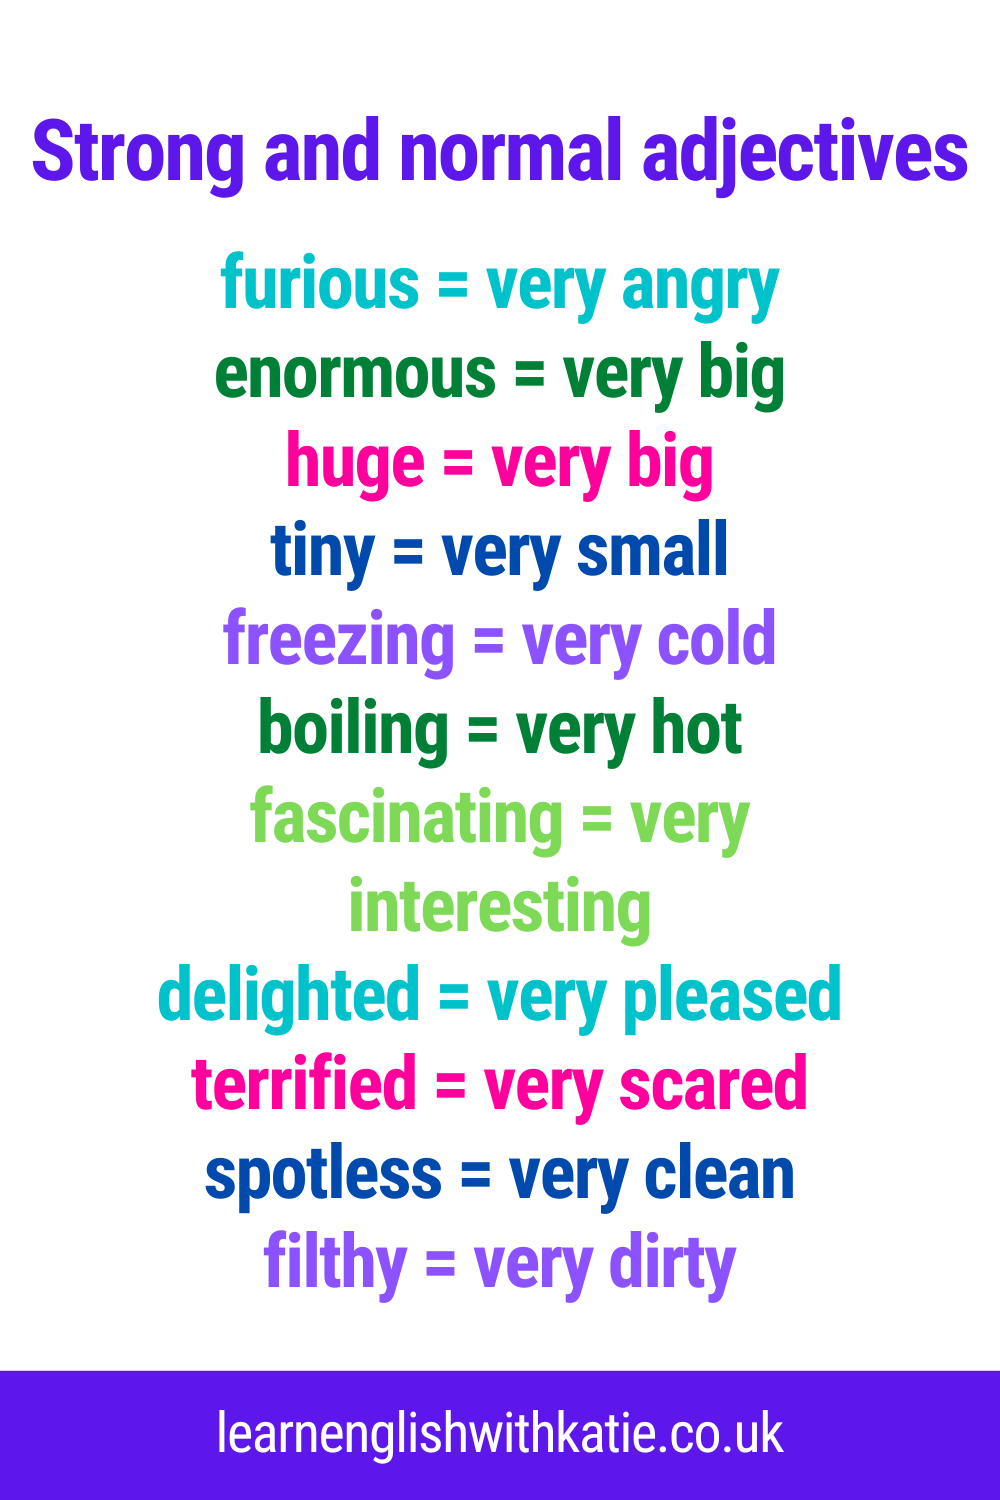 Pinterest pin listing some strong and normal adjectives